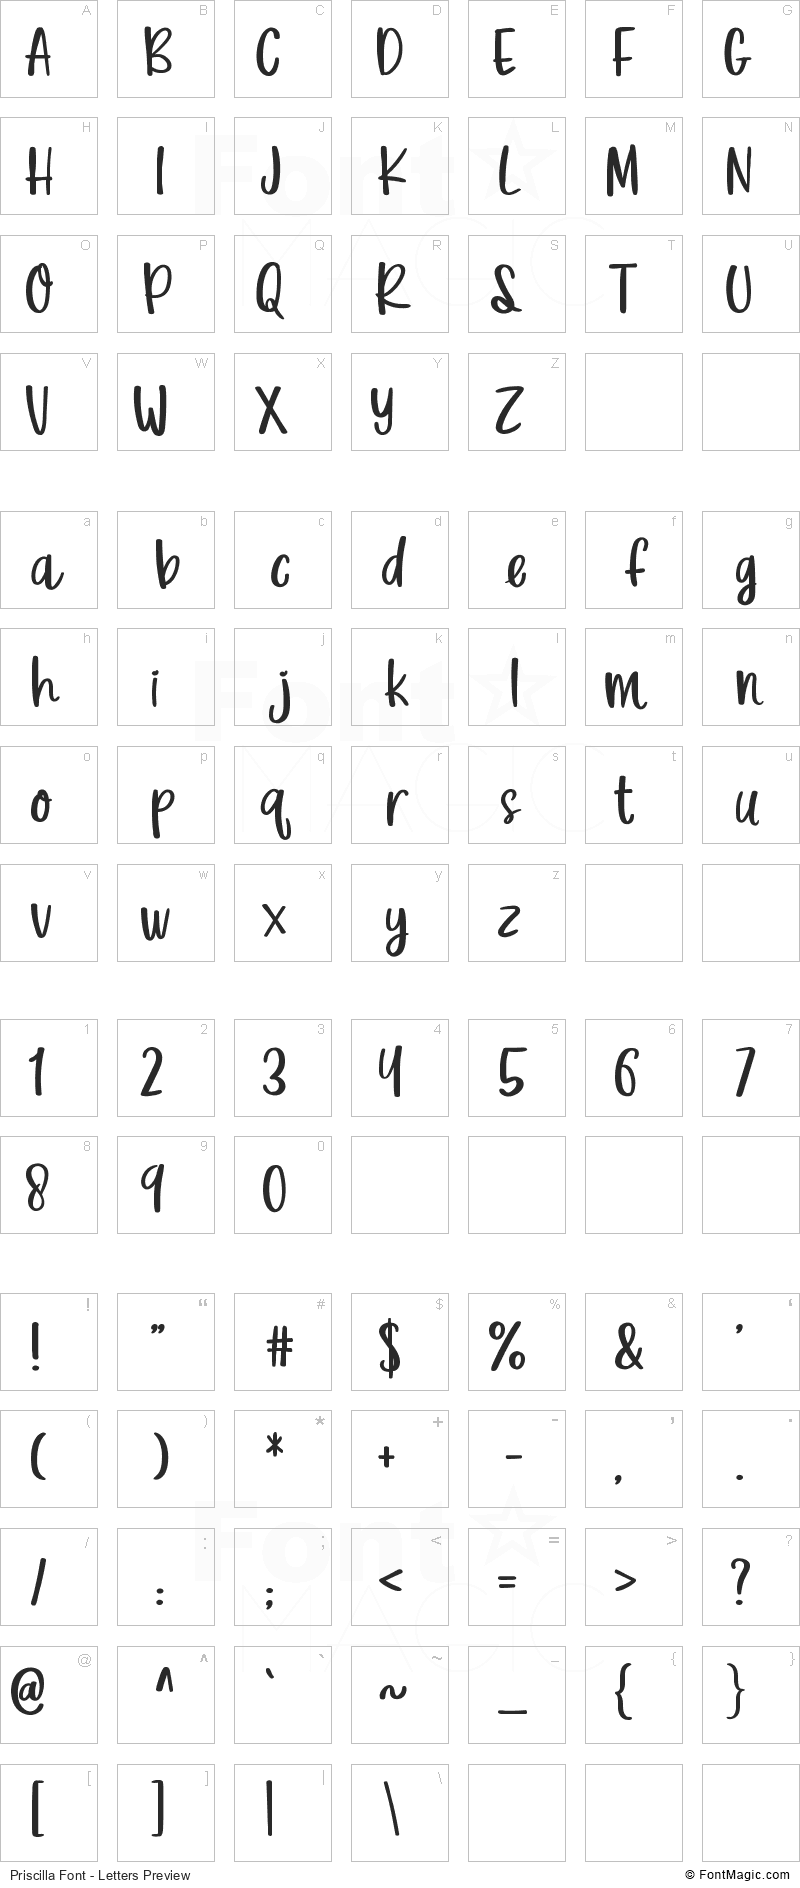 Priscilla Font - All Latters Preview Chart